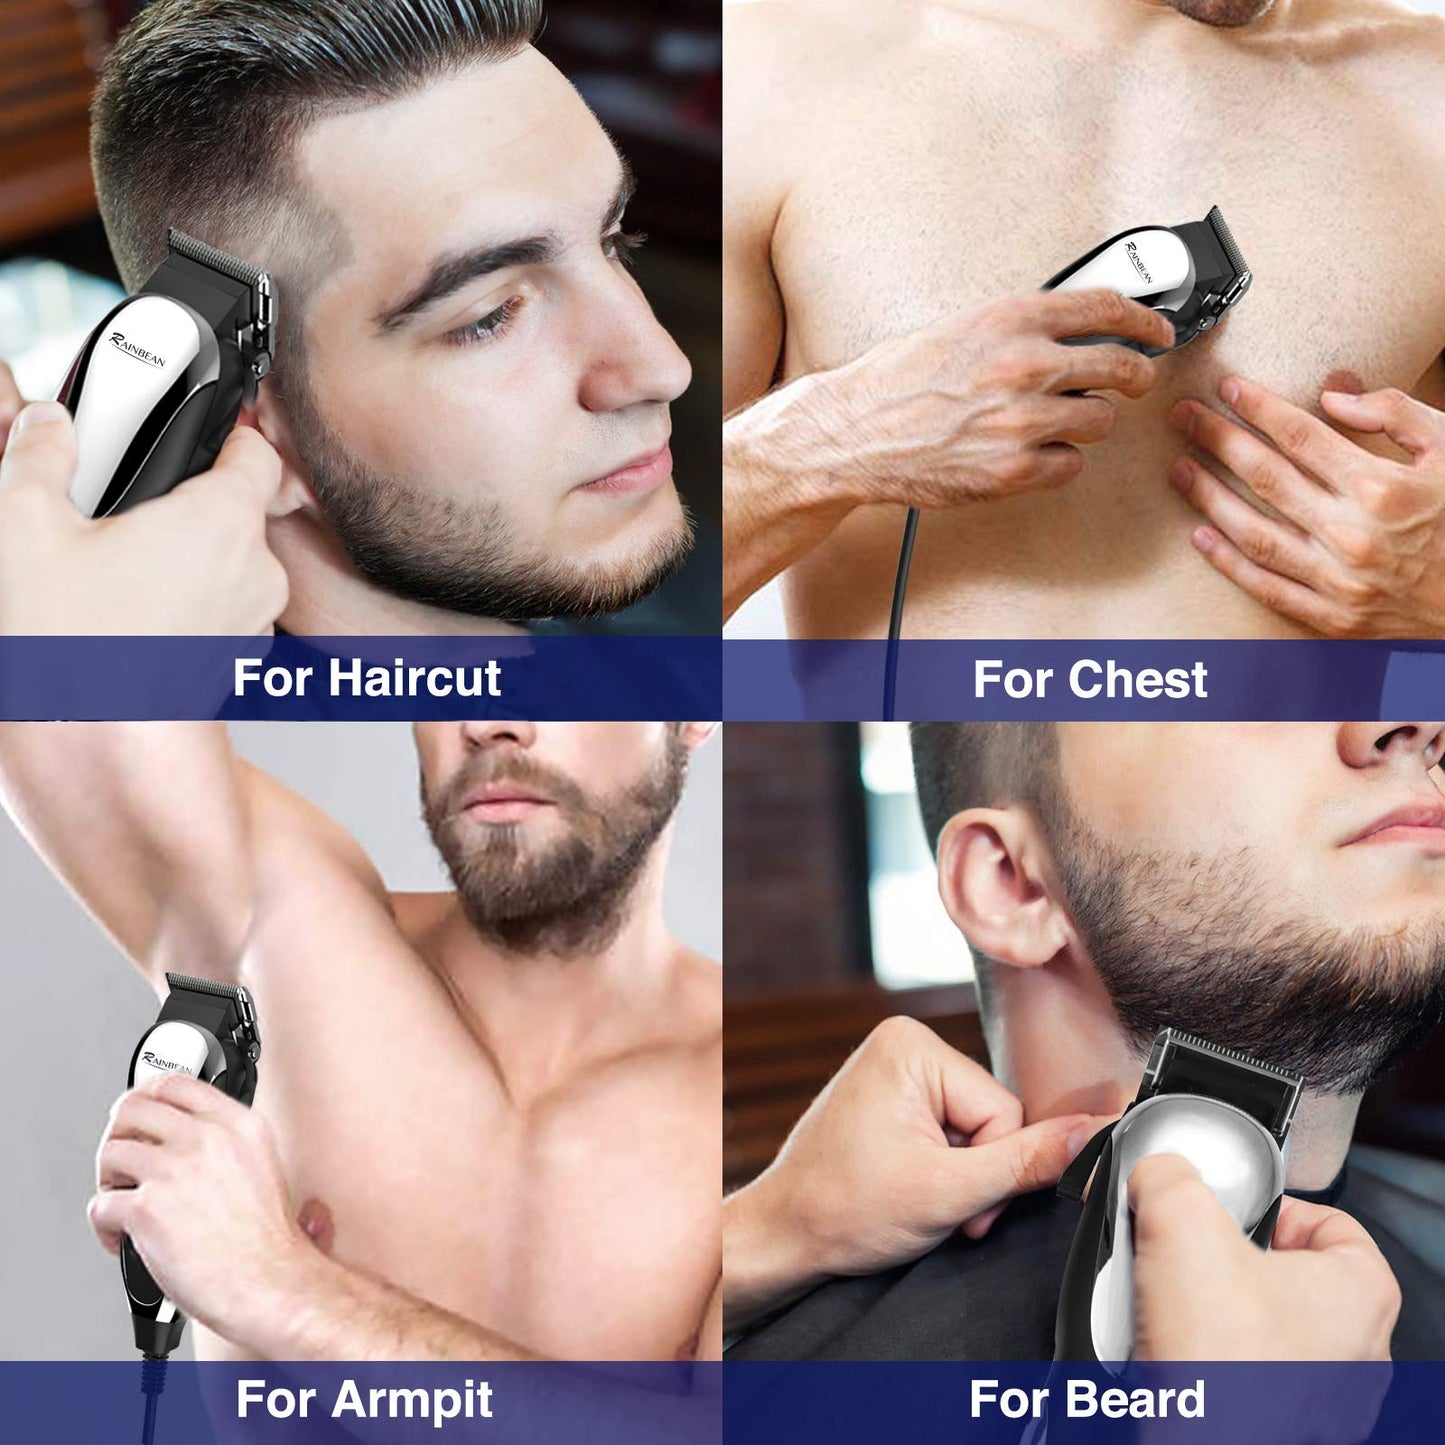 Professional Hair Clippers, Corded  for Men Kids,   Clipping and Trimming Kit